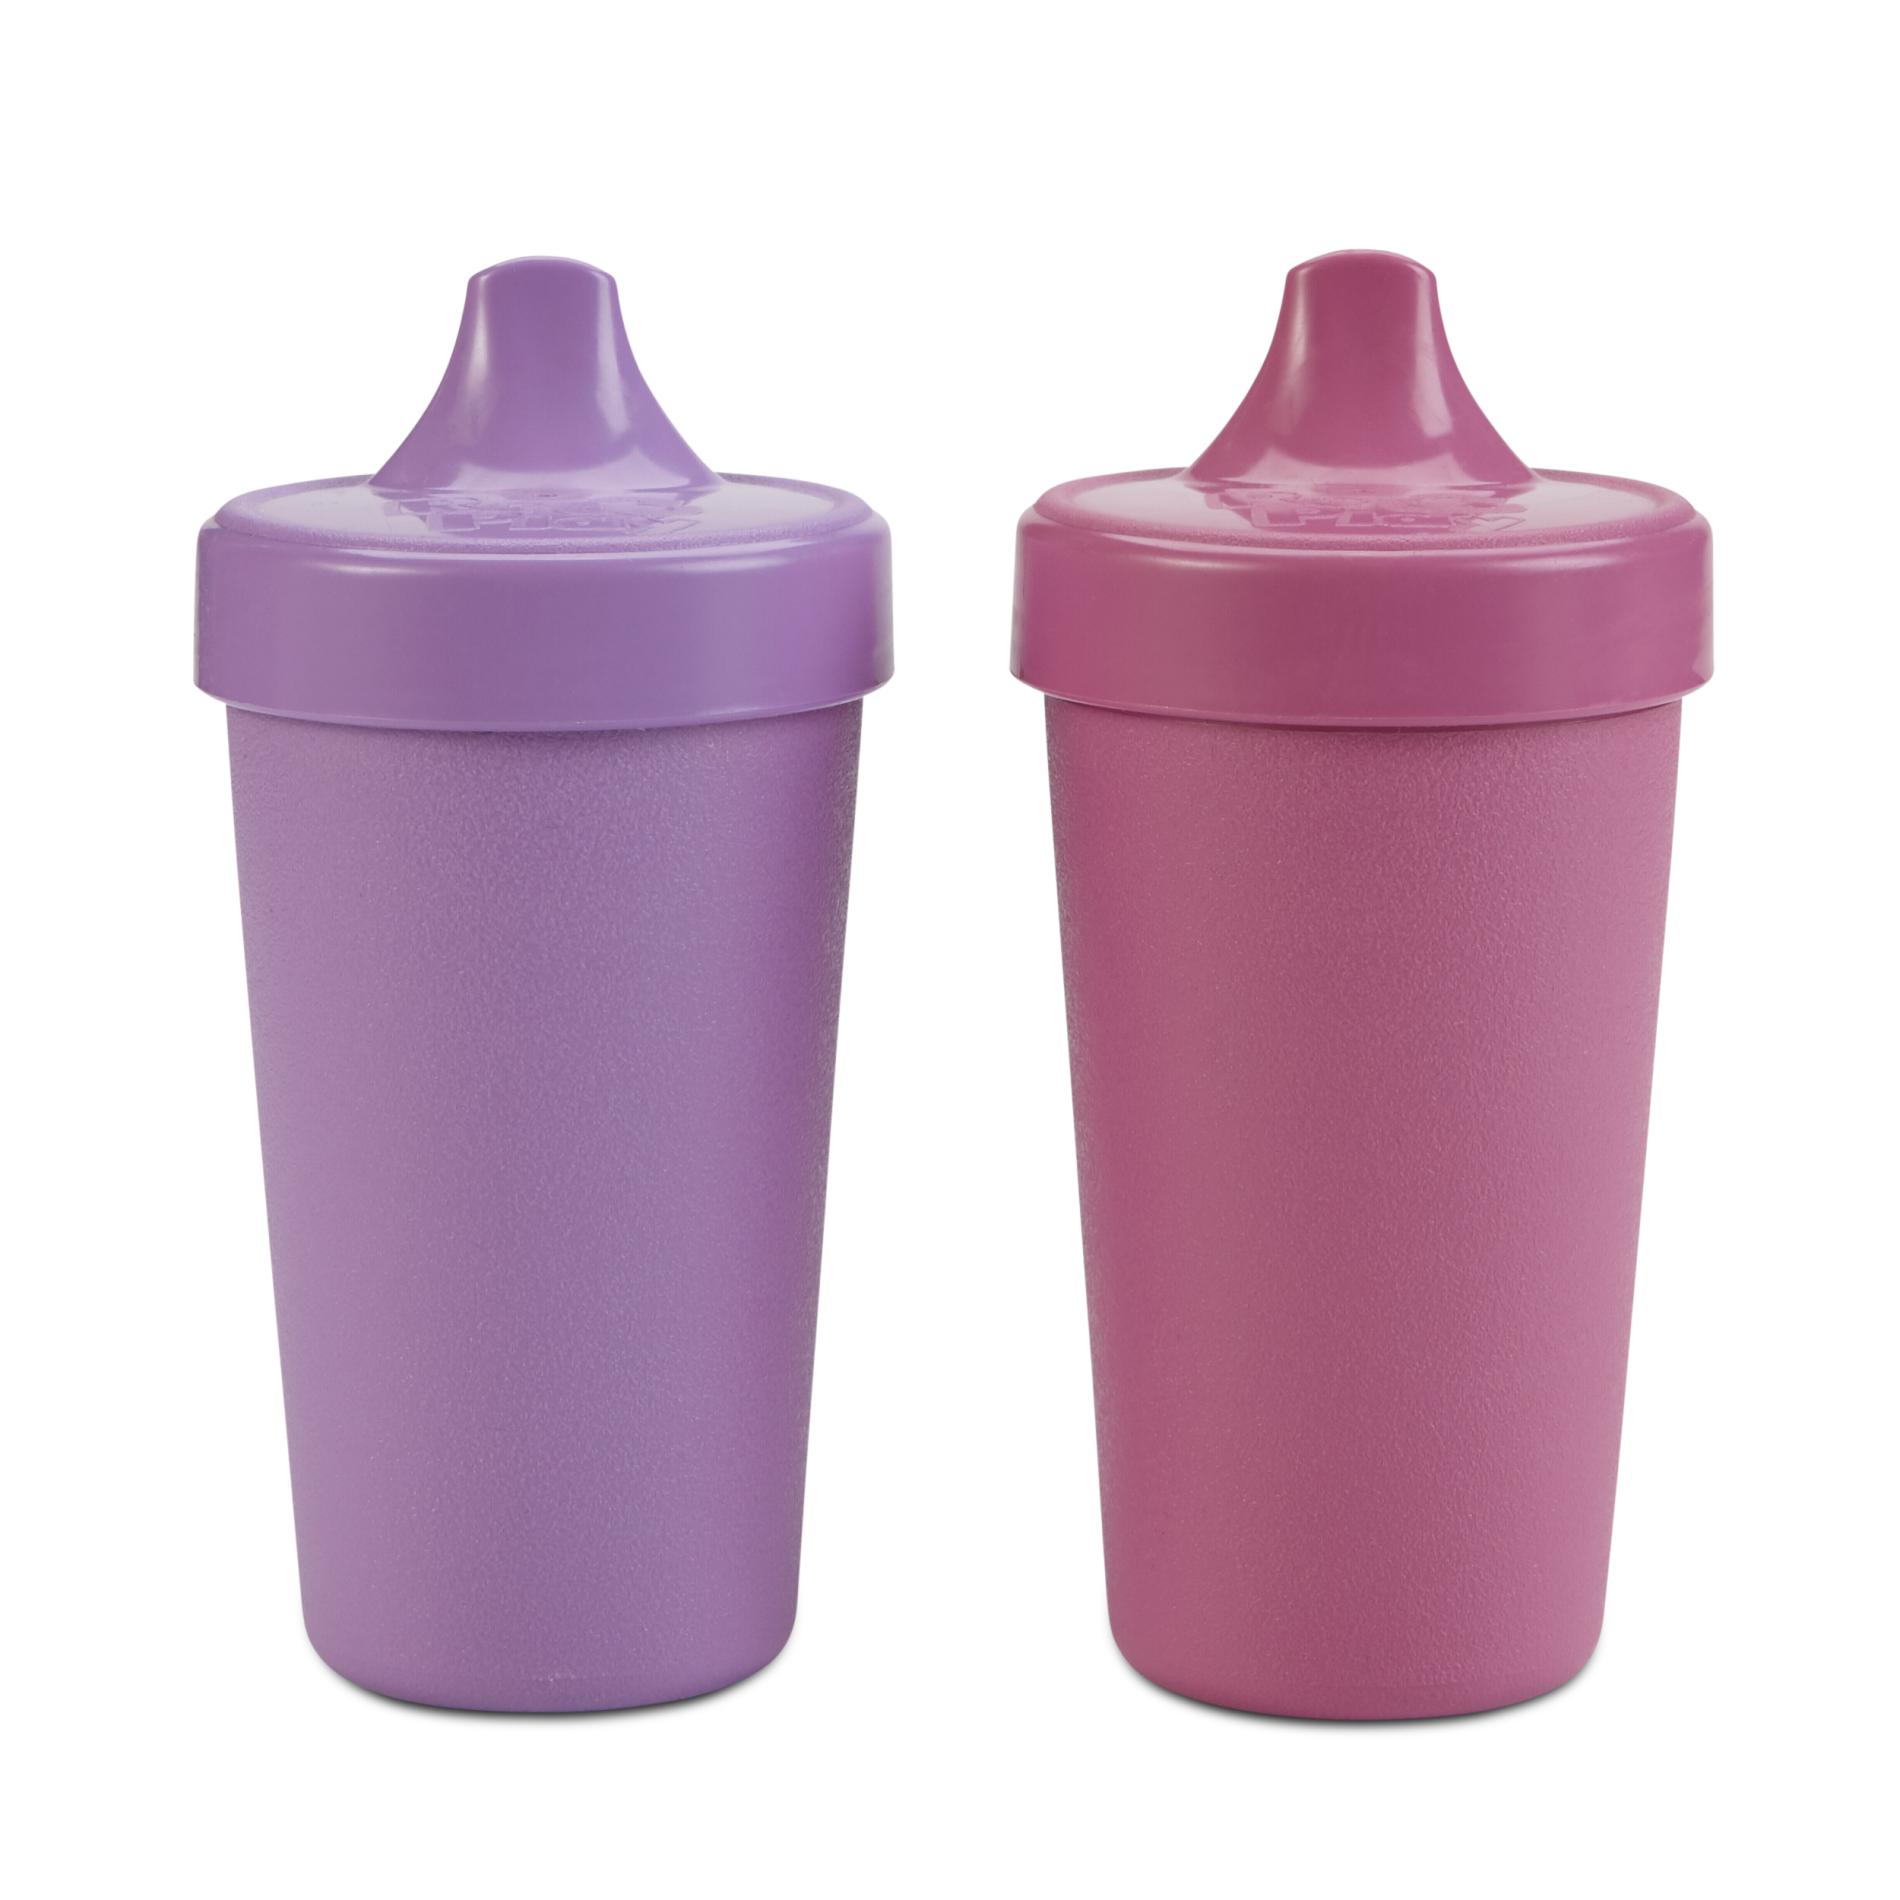 Re-Plays Infants' 2-Pack Spill-Proof Cups